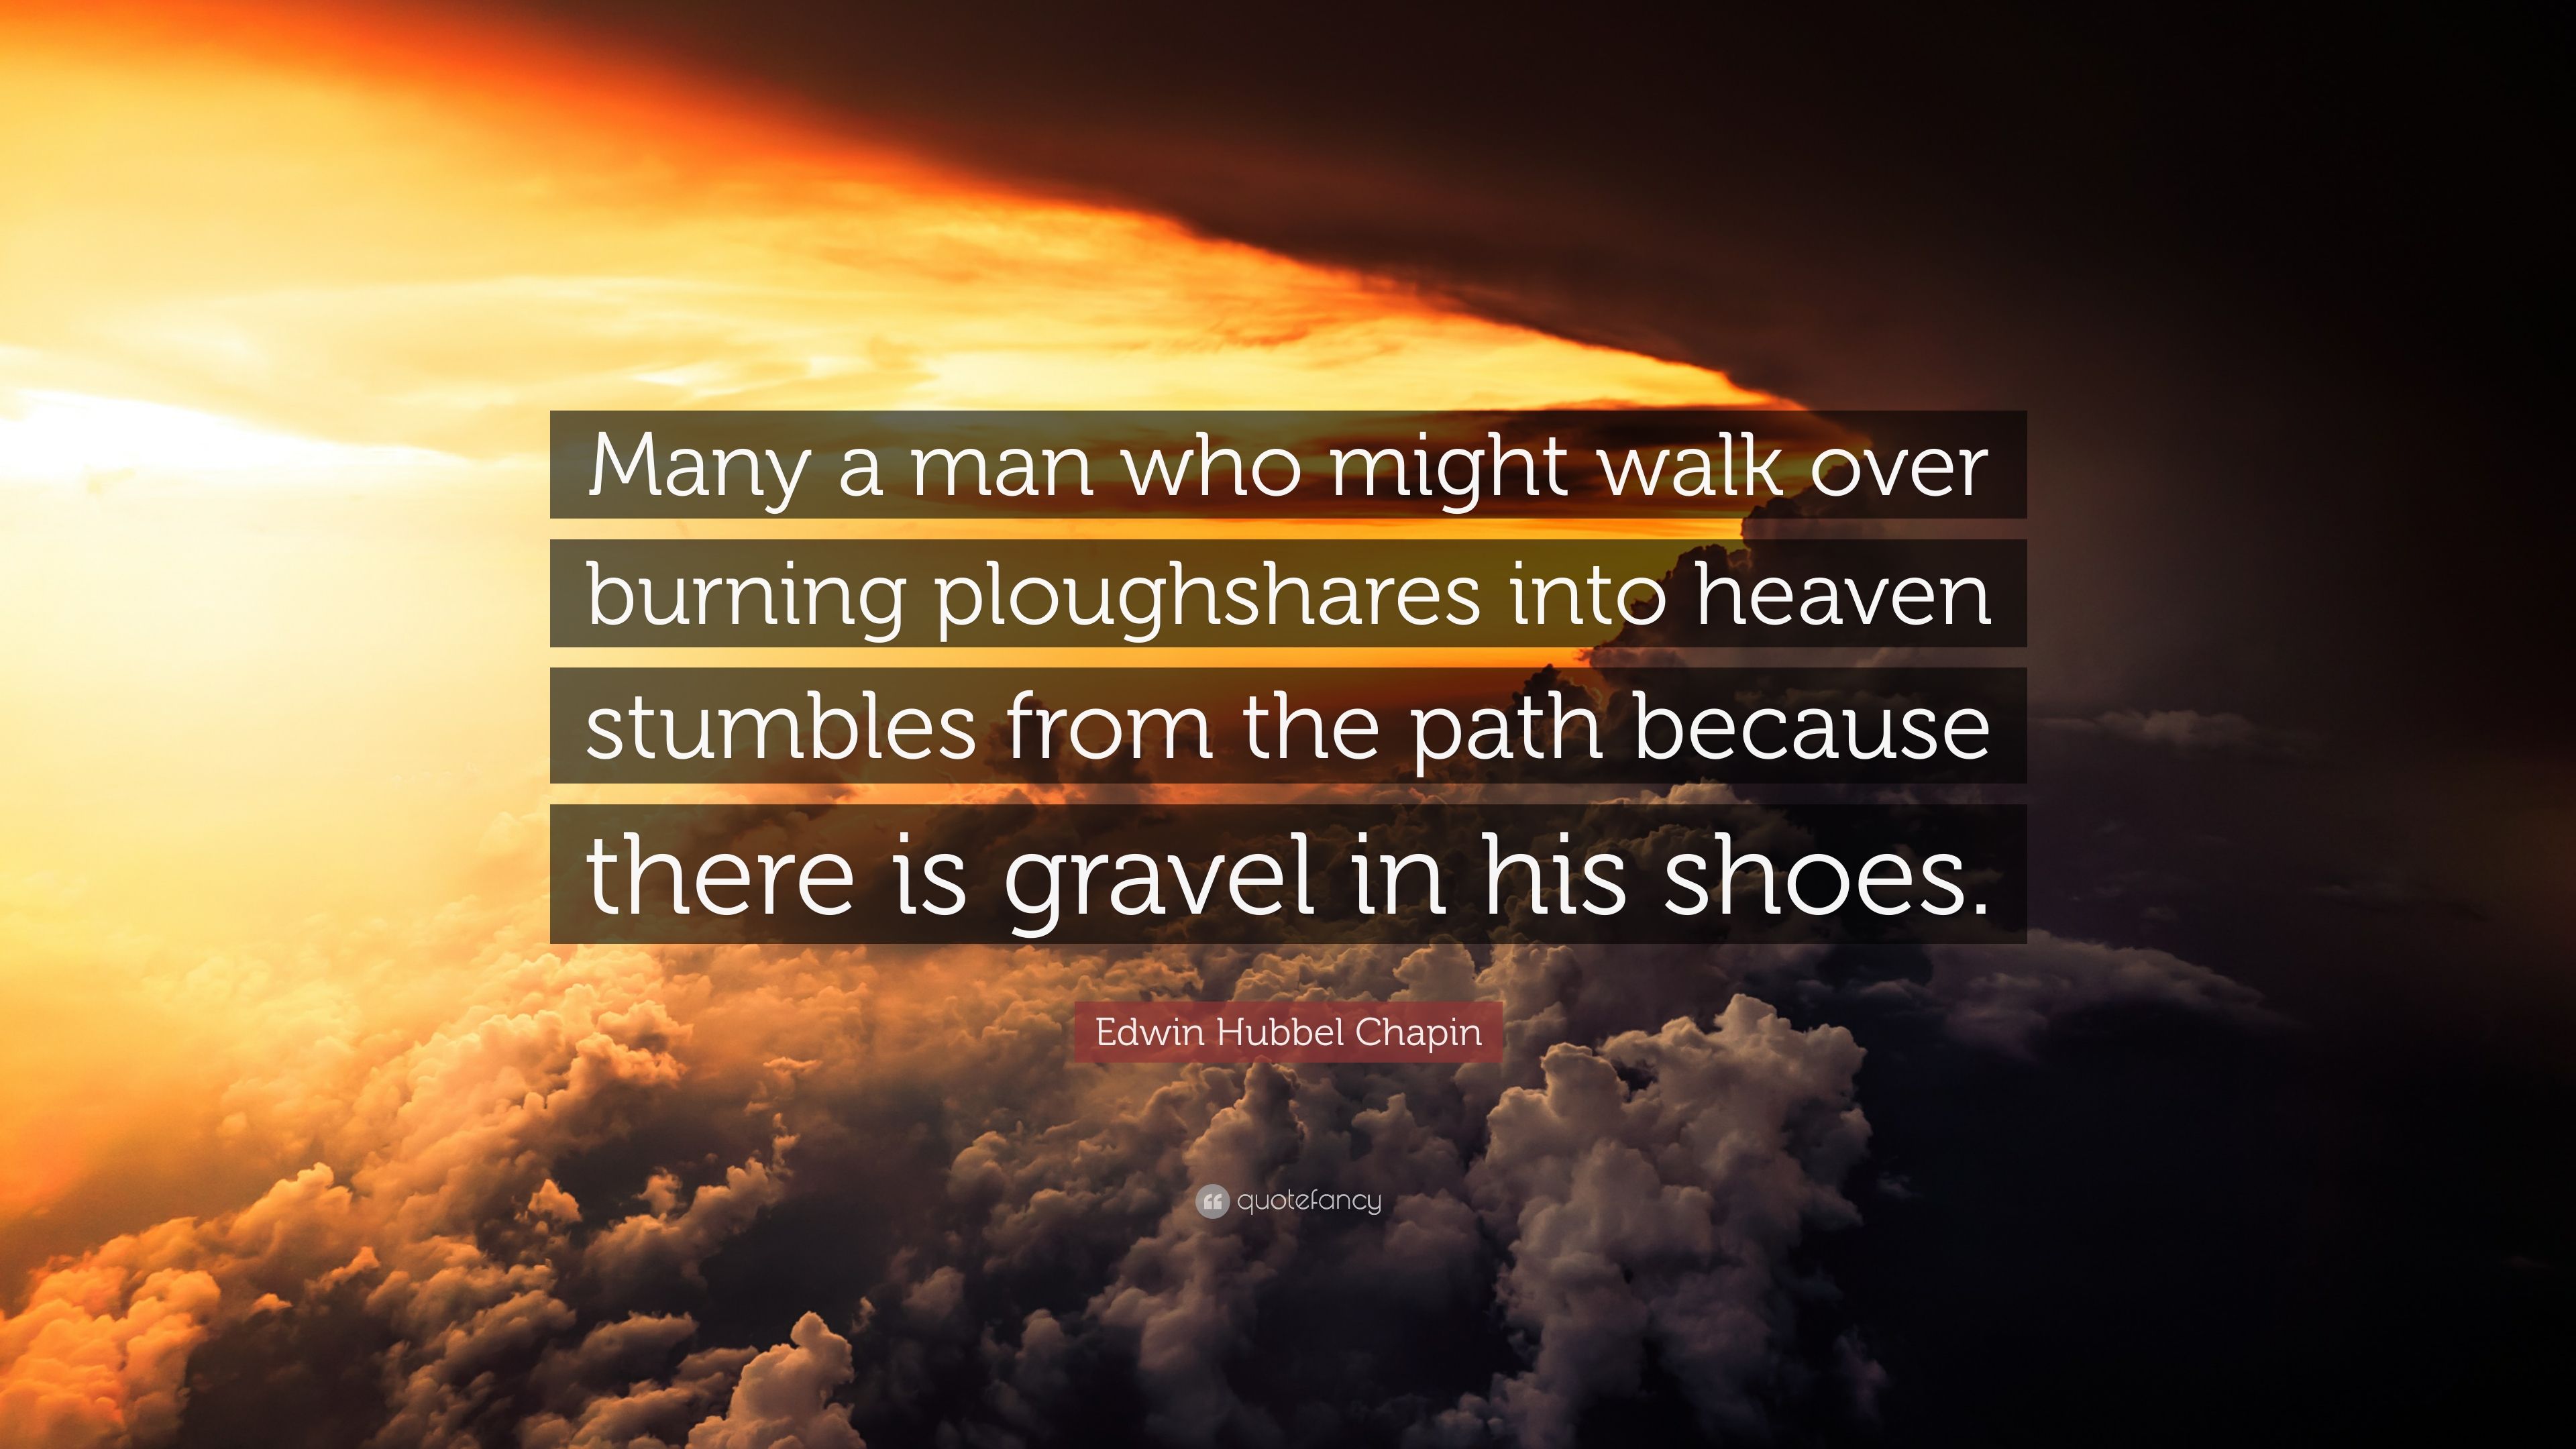 Edwin Hubbel Chapin Quote: “Many a man who might walk over burning ...